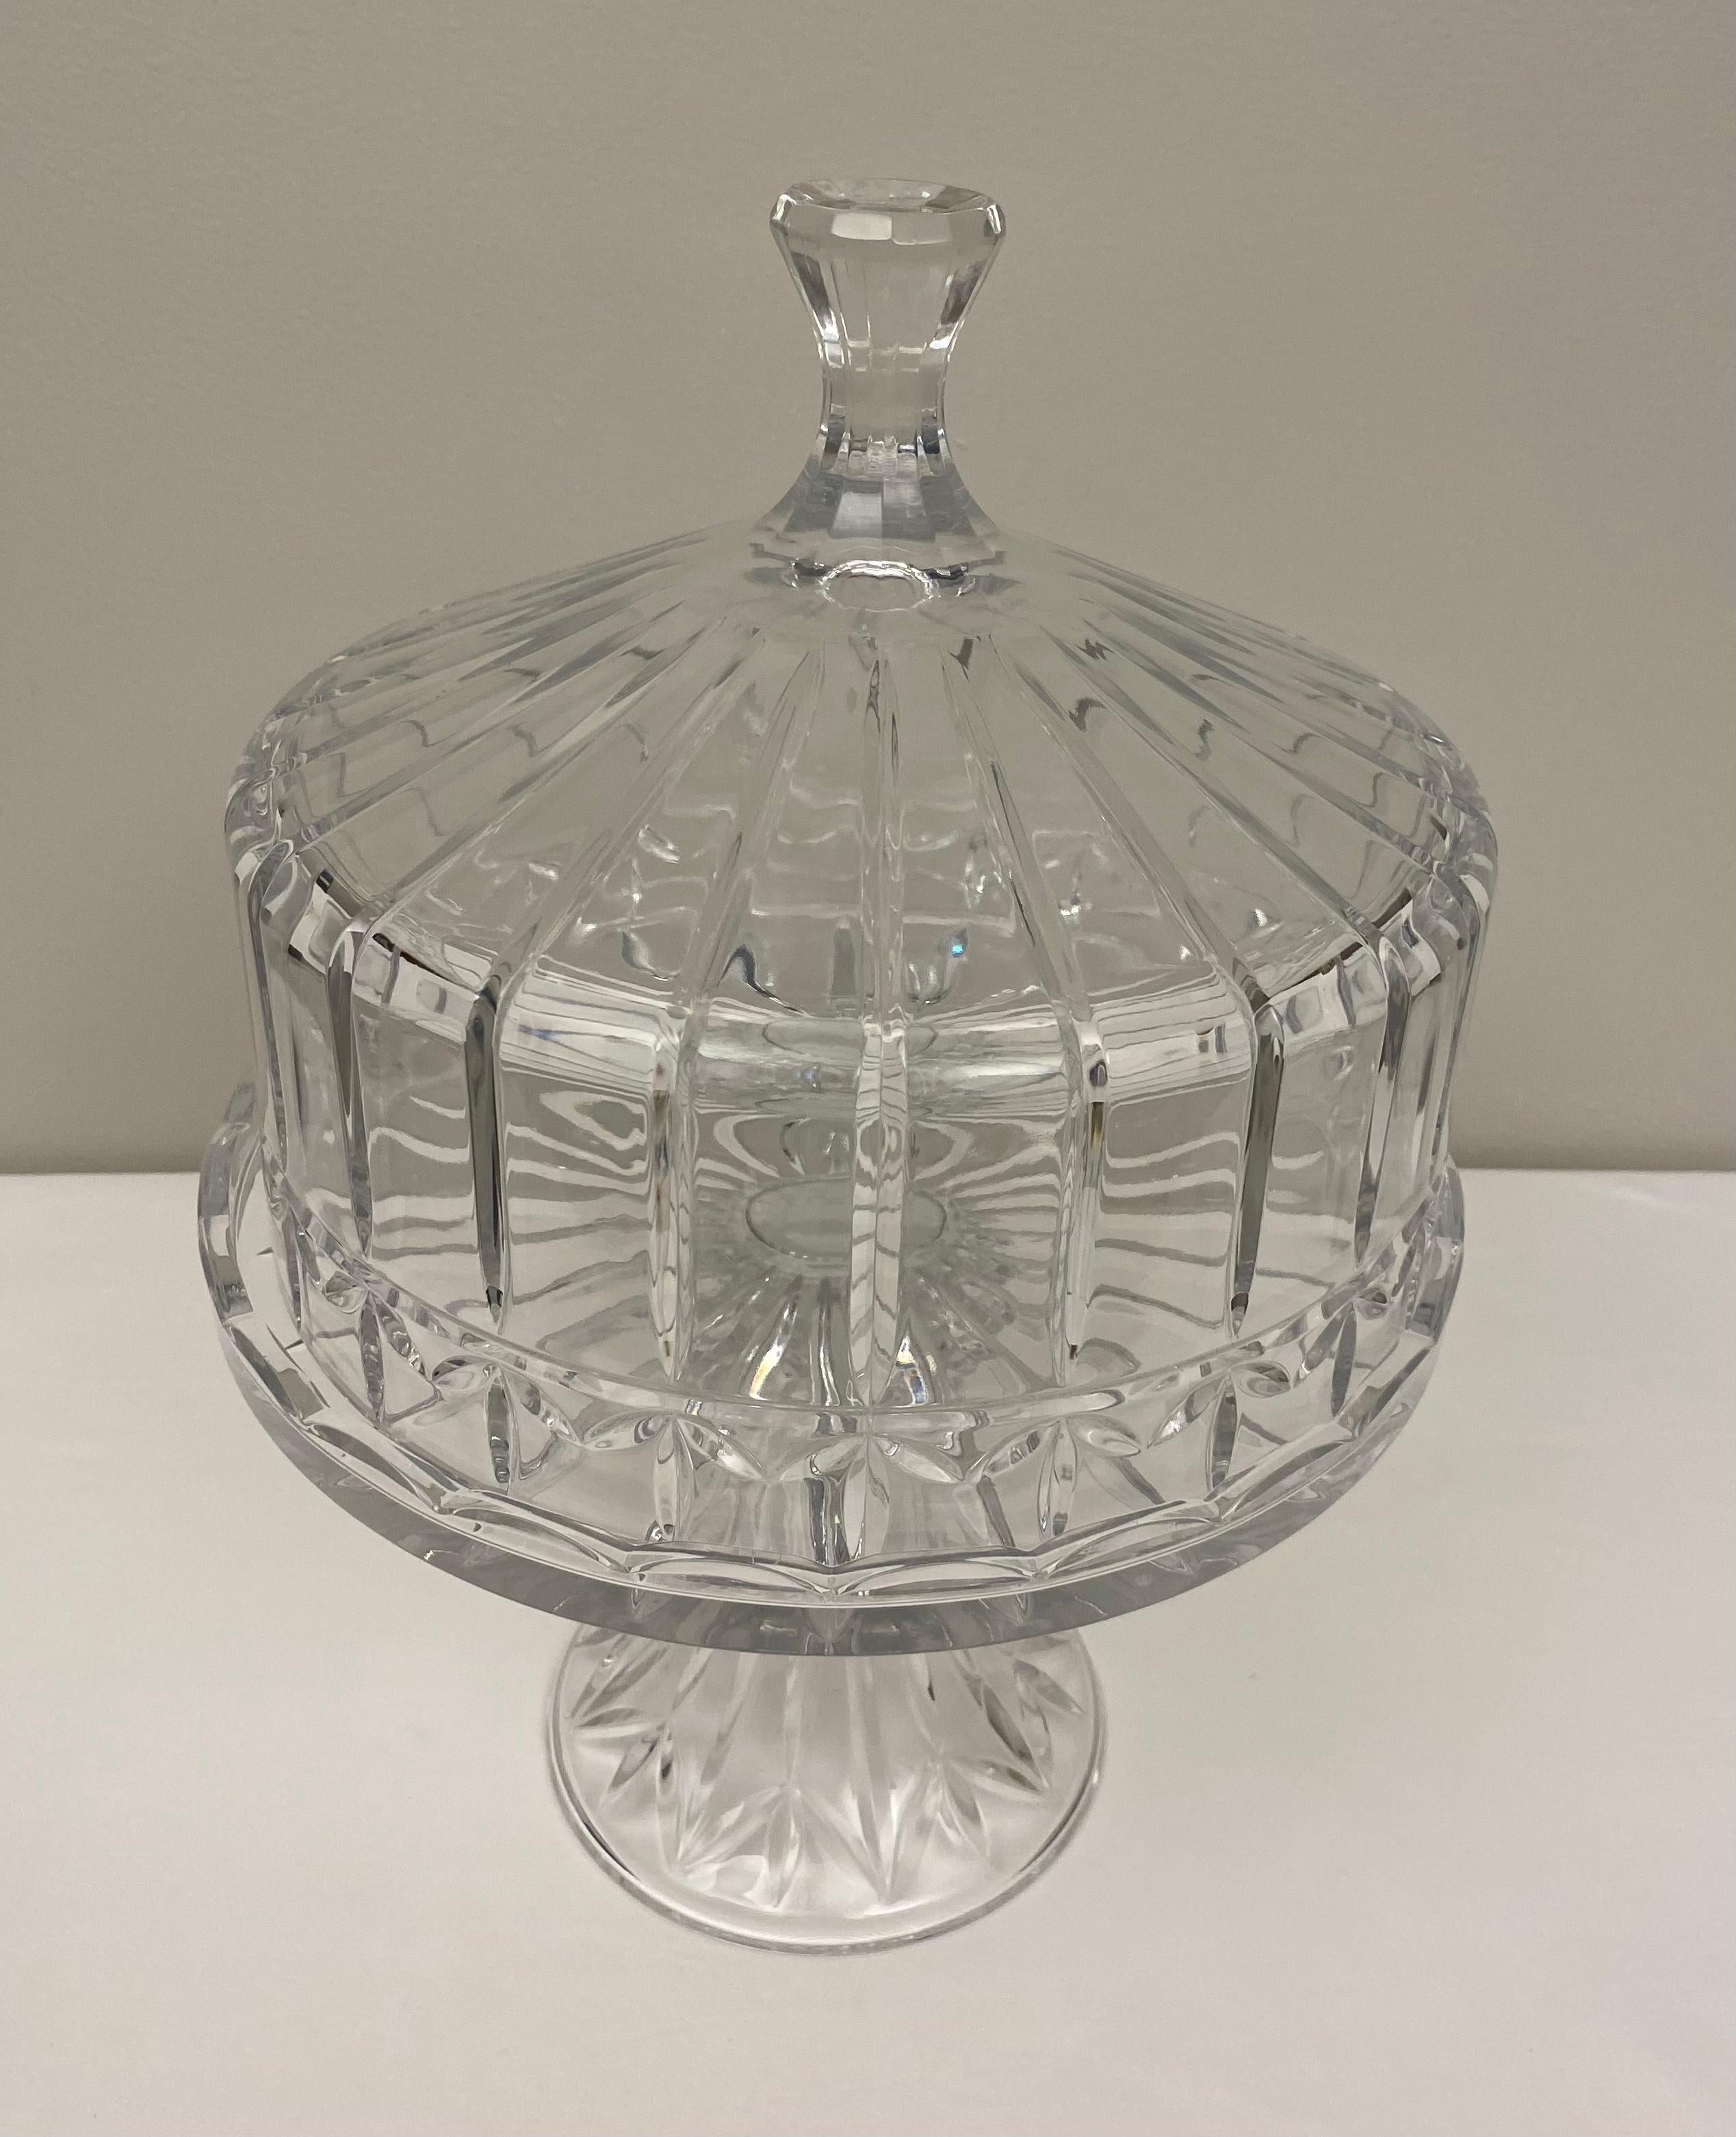 This delightfully heavy, cut crystal cake or patisserie stand sits on a pedestal base. Perfect for displaying your culinary confections, this piece’s simple, elegant look will mix with any decor.

Dimensions: 11 3/4